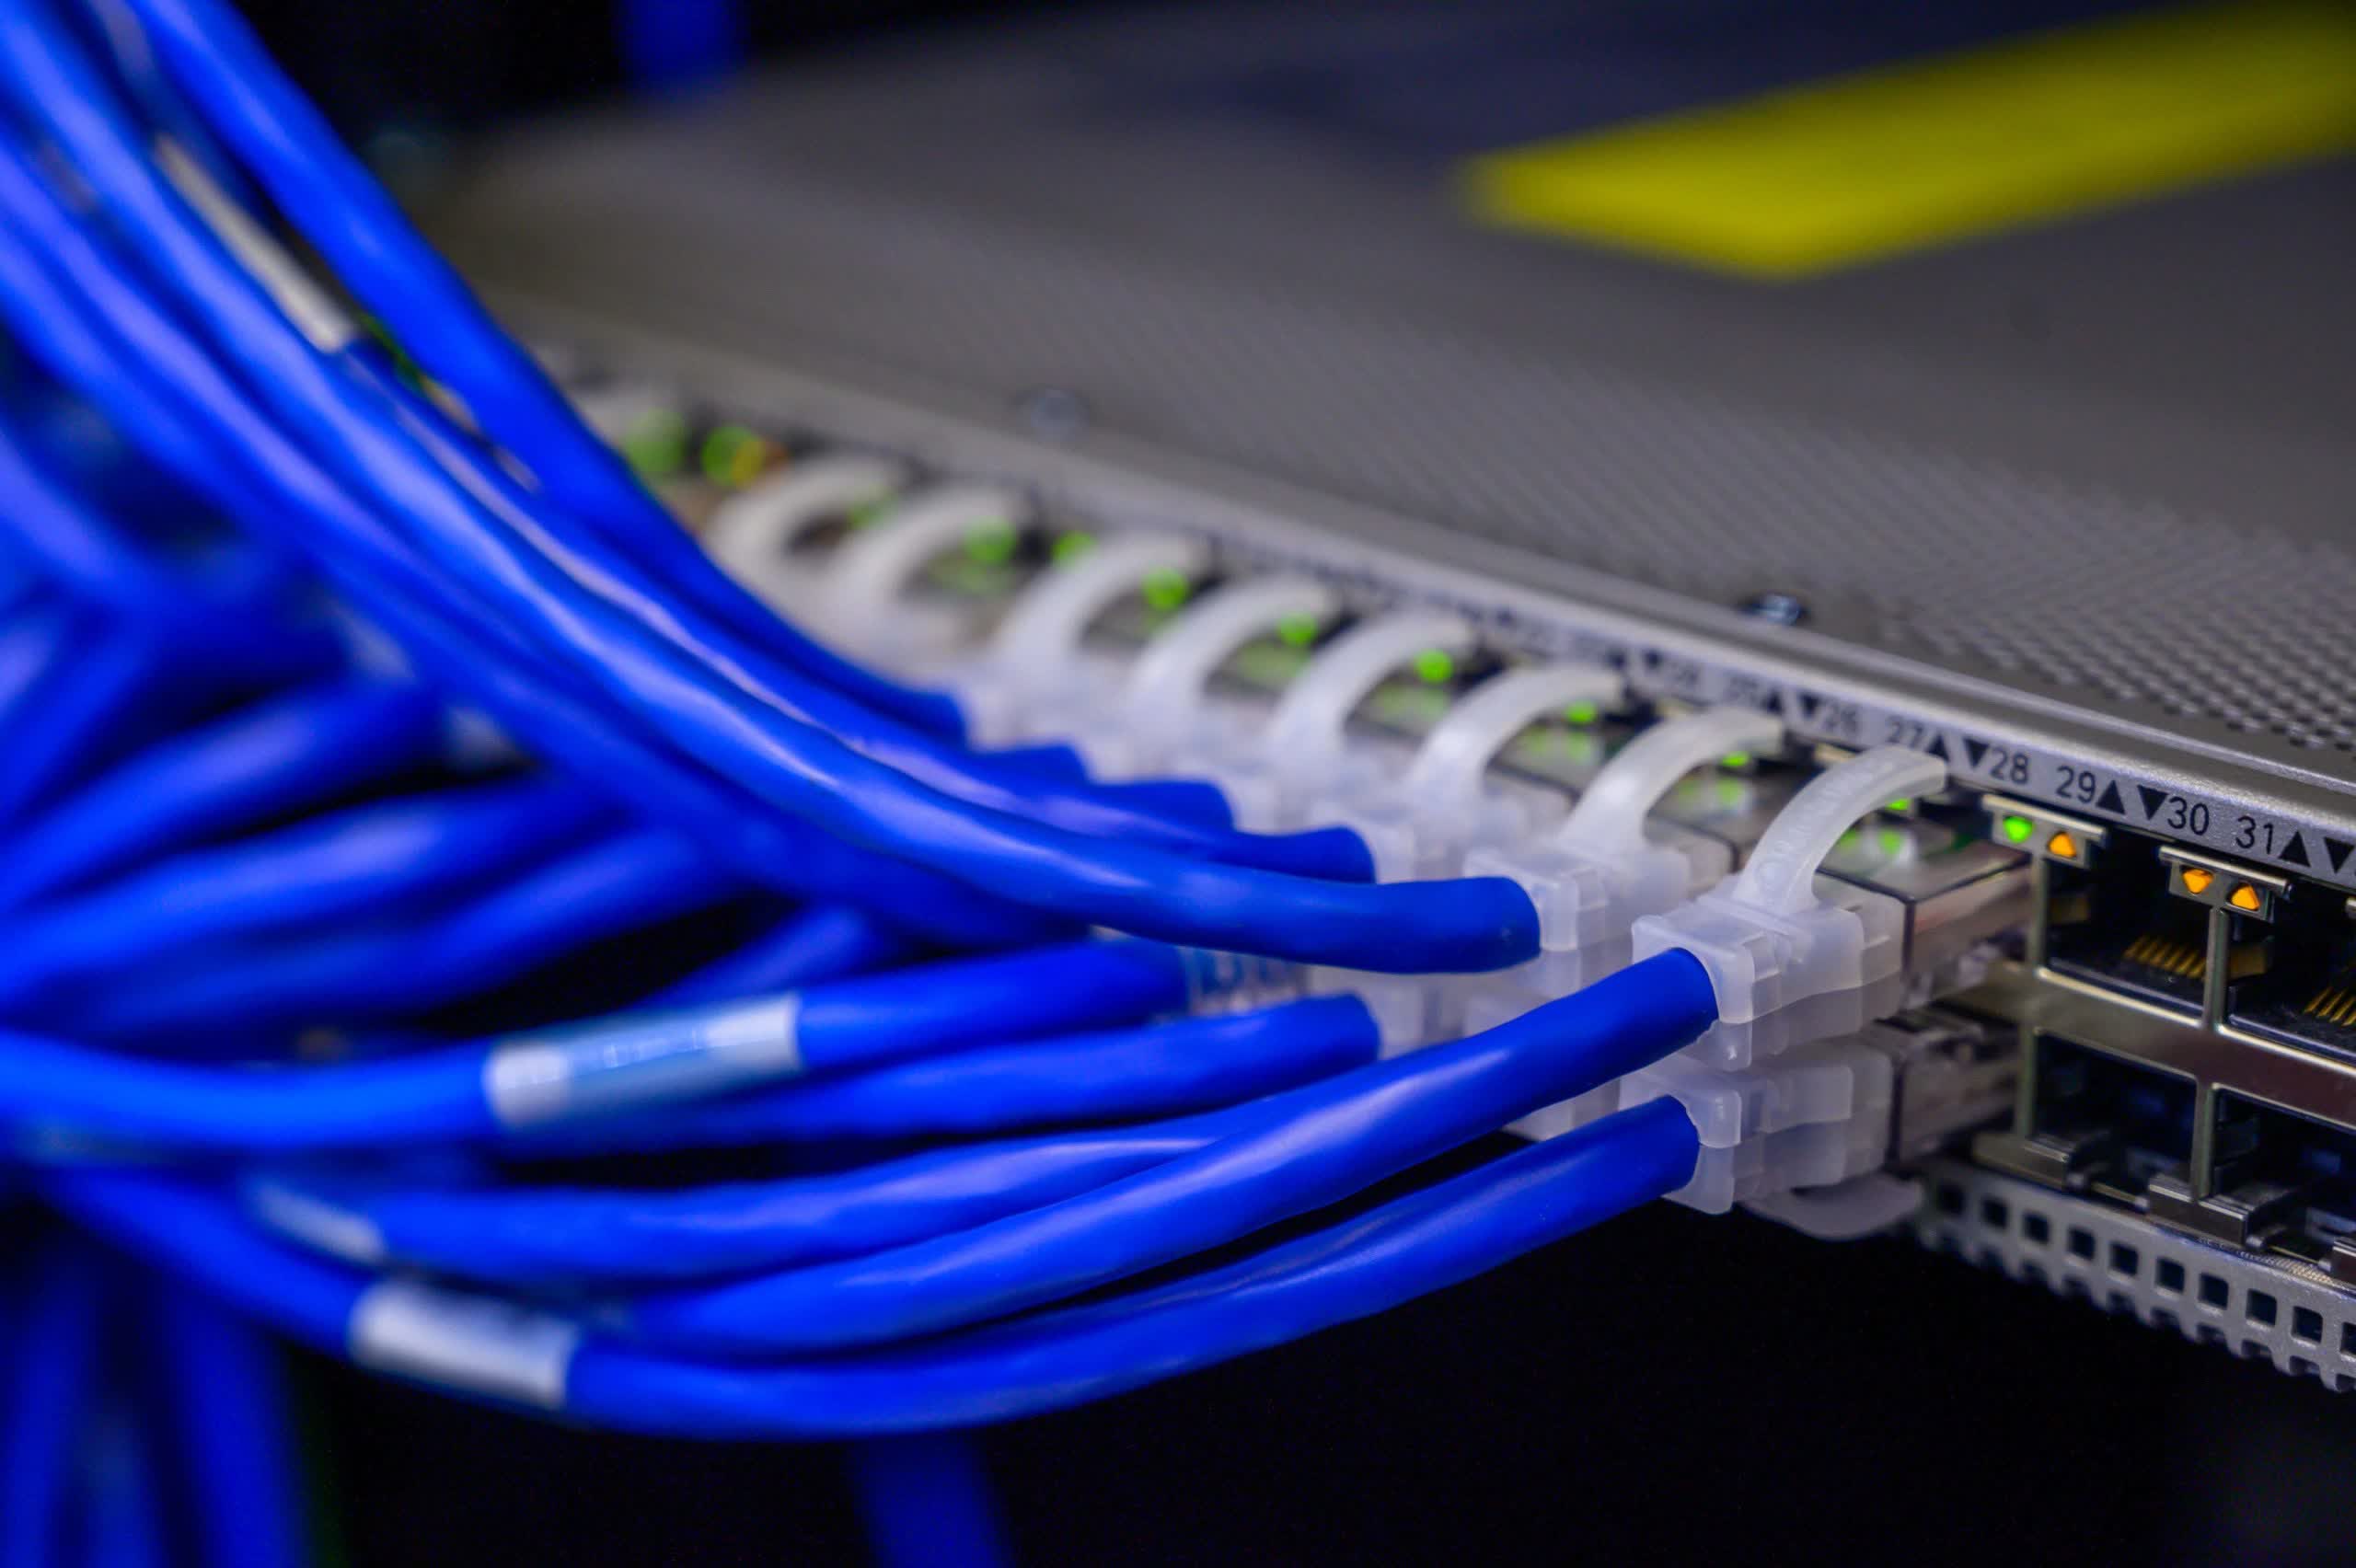 A new internet standard called L4S aims to lower latency, bring more speed to the web